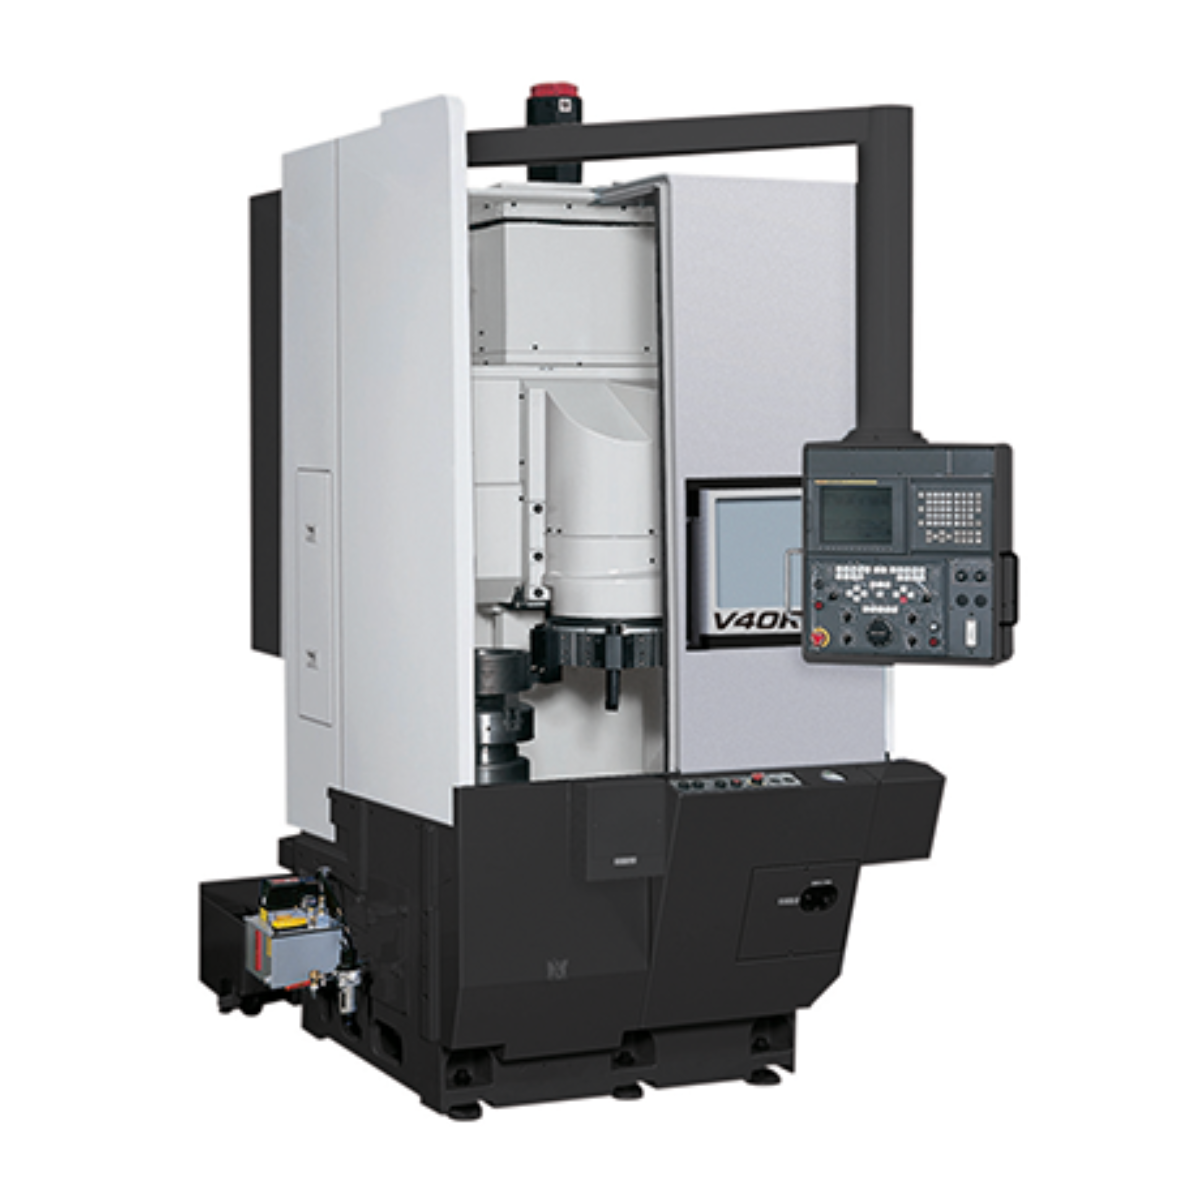 The Haas V40R Vertical Lathe: A Powerful and Versatile Machine